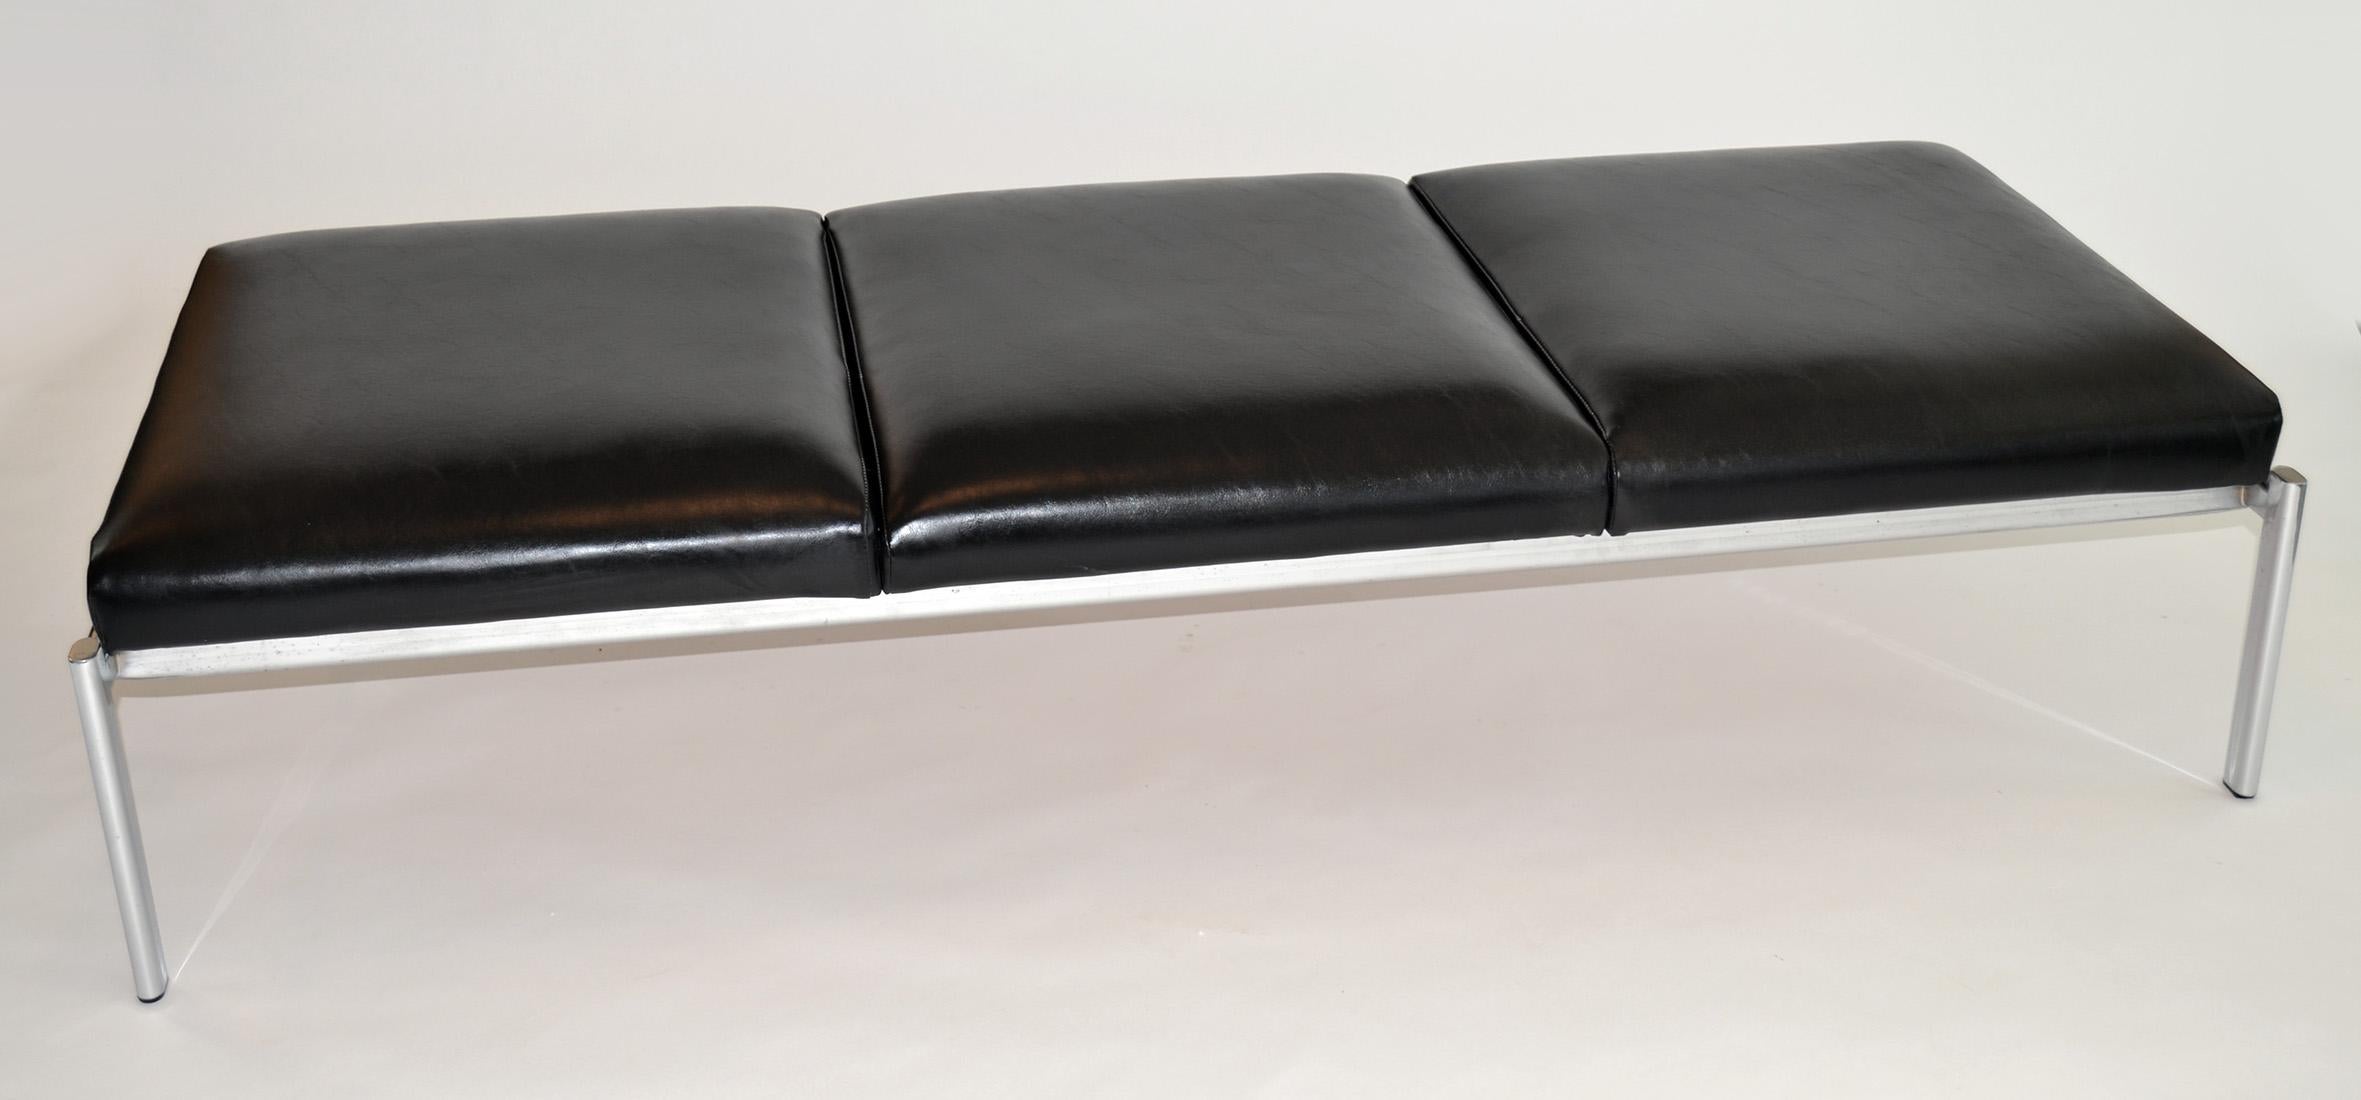 Three-seat bench in leather and chrome by Stendig designed by Ilmari Tapiovaara. A bench or daybed in black leather with three attached cushions on a chromed steel base. Bank asset tag remains.
  